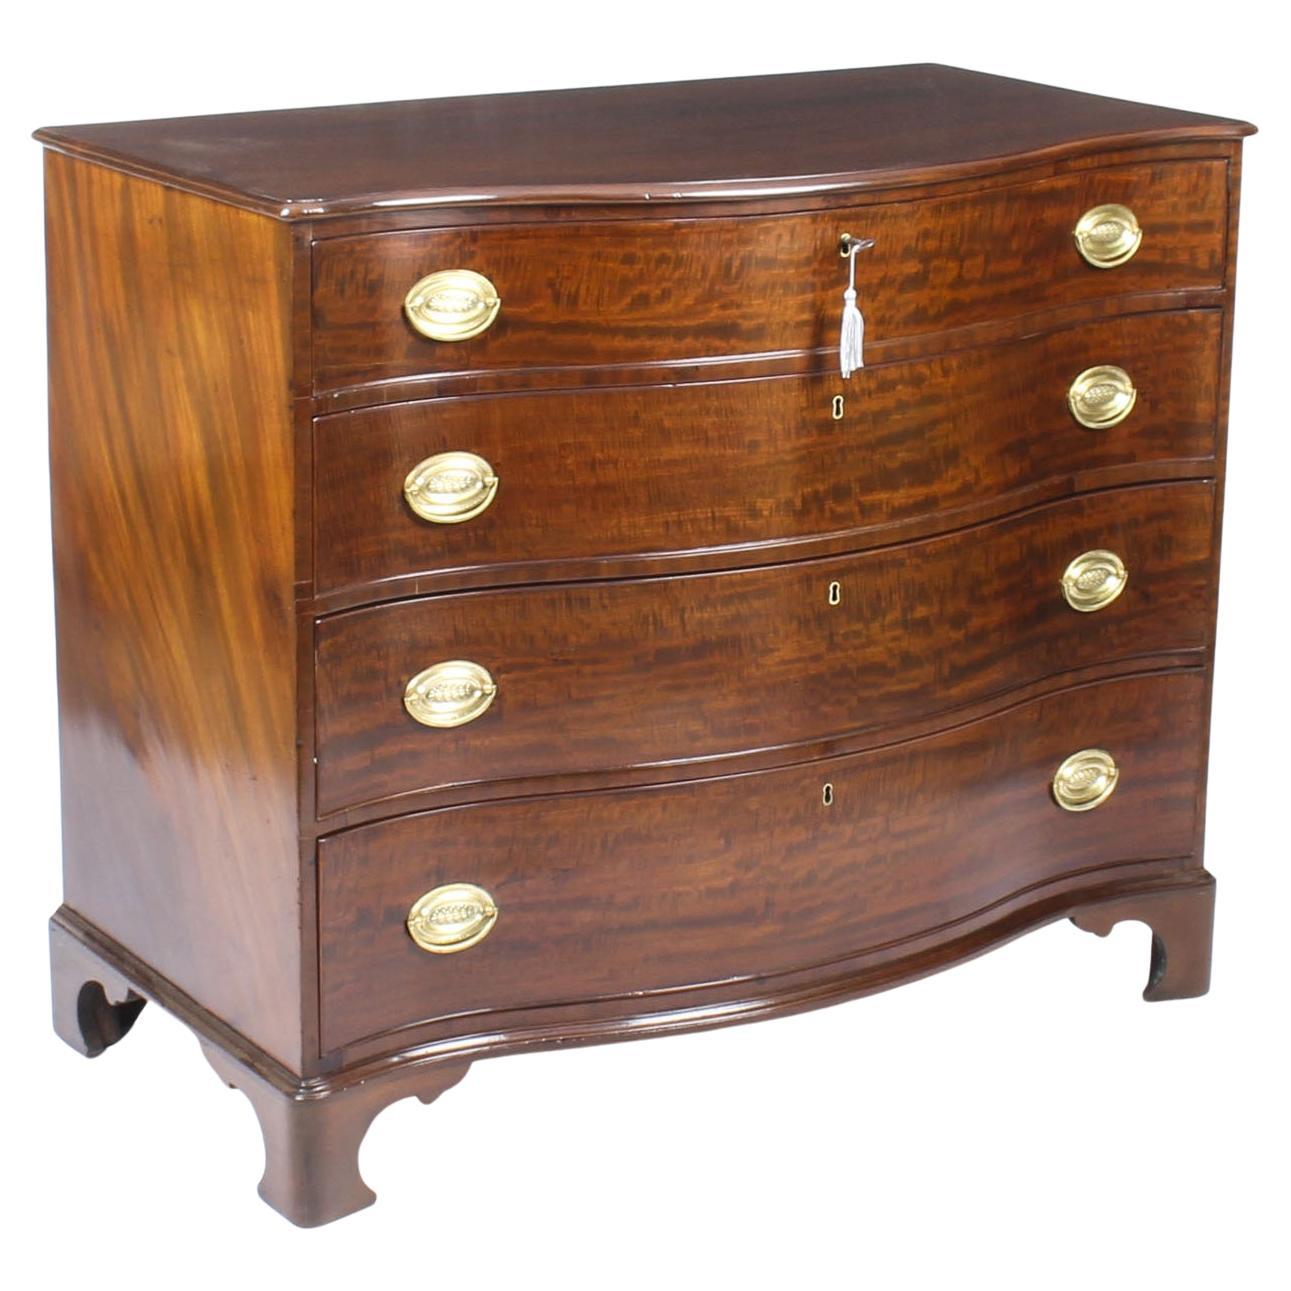 Antique George III Serpentine Flame Mahogany Chest Drawers, 18th Century For Sale